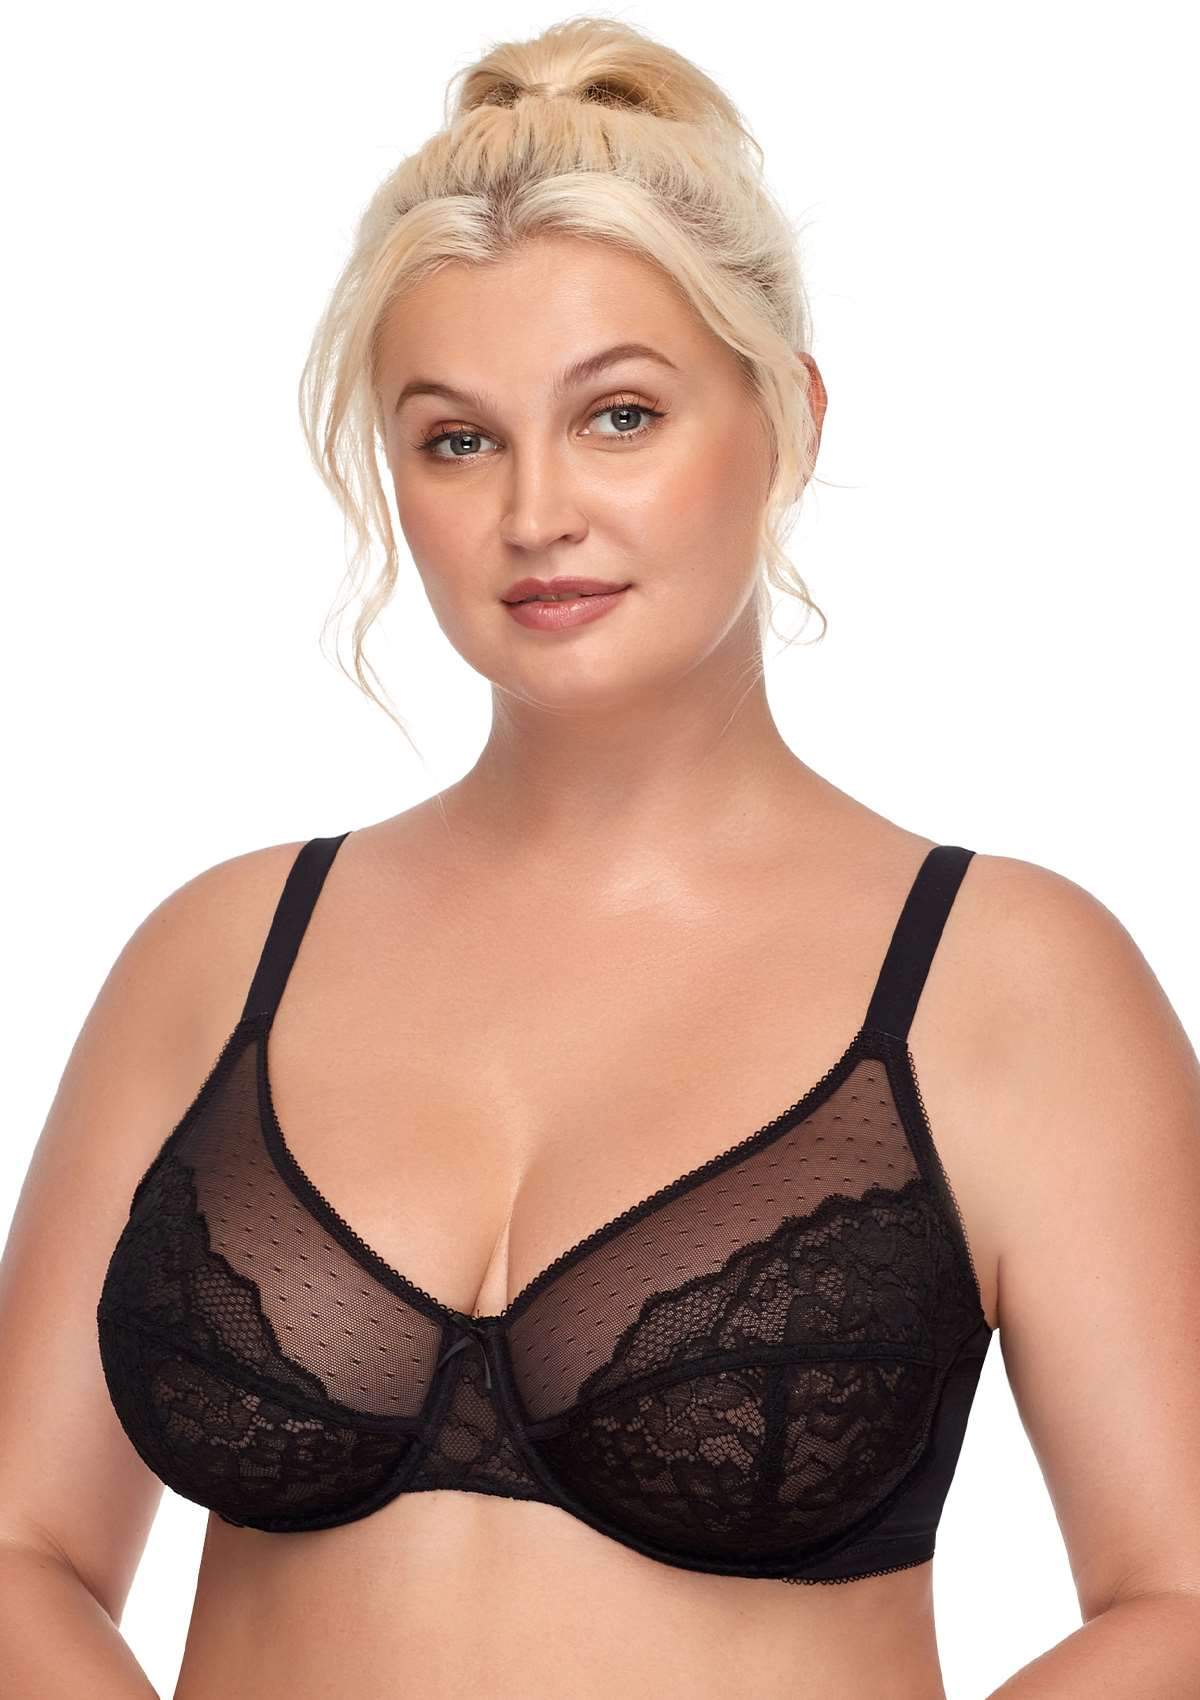 HSIA Enchante Lace Wire Bra For Lifting And Separating Large Breasts - Black / 38 / D